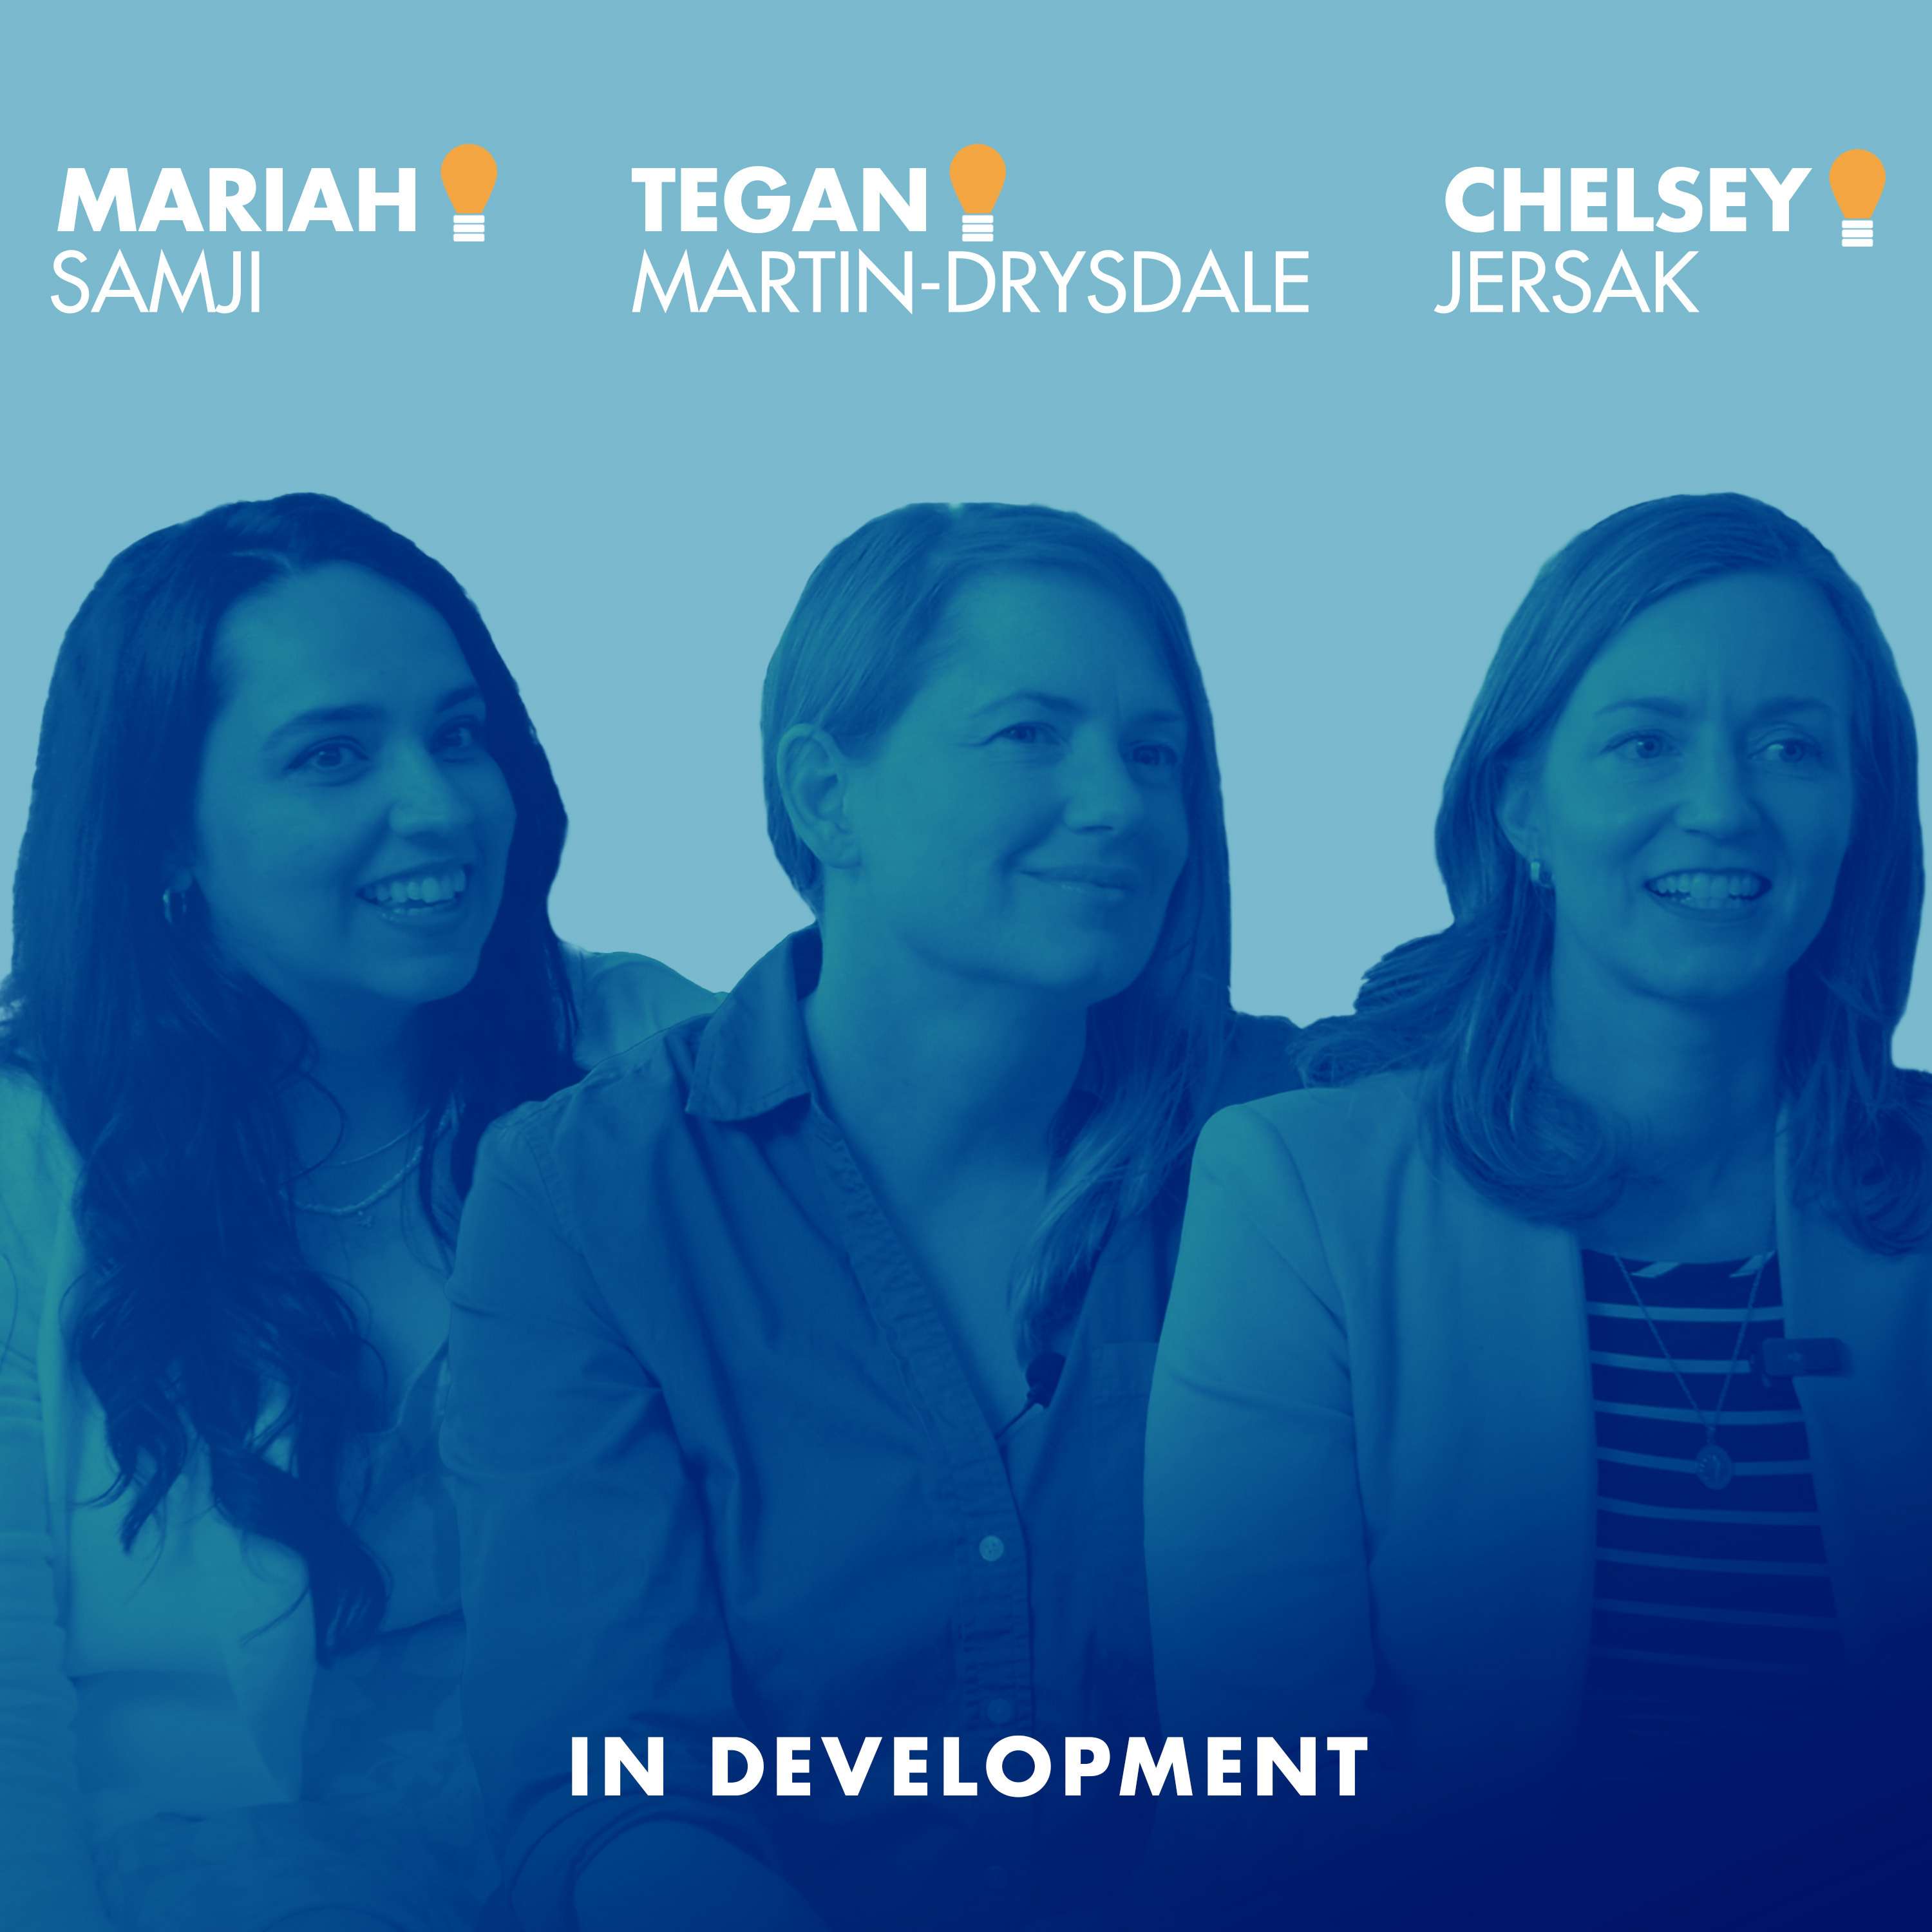 In Development Episode 36 - Celebrating A Decade of Infill Development in Edmonton with Special Guests Tegan Martin-Drysdale, Chelsey Jersak and Mariah Samji